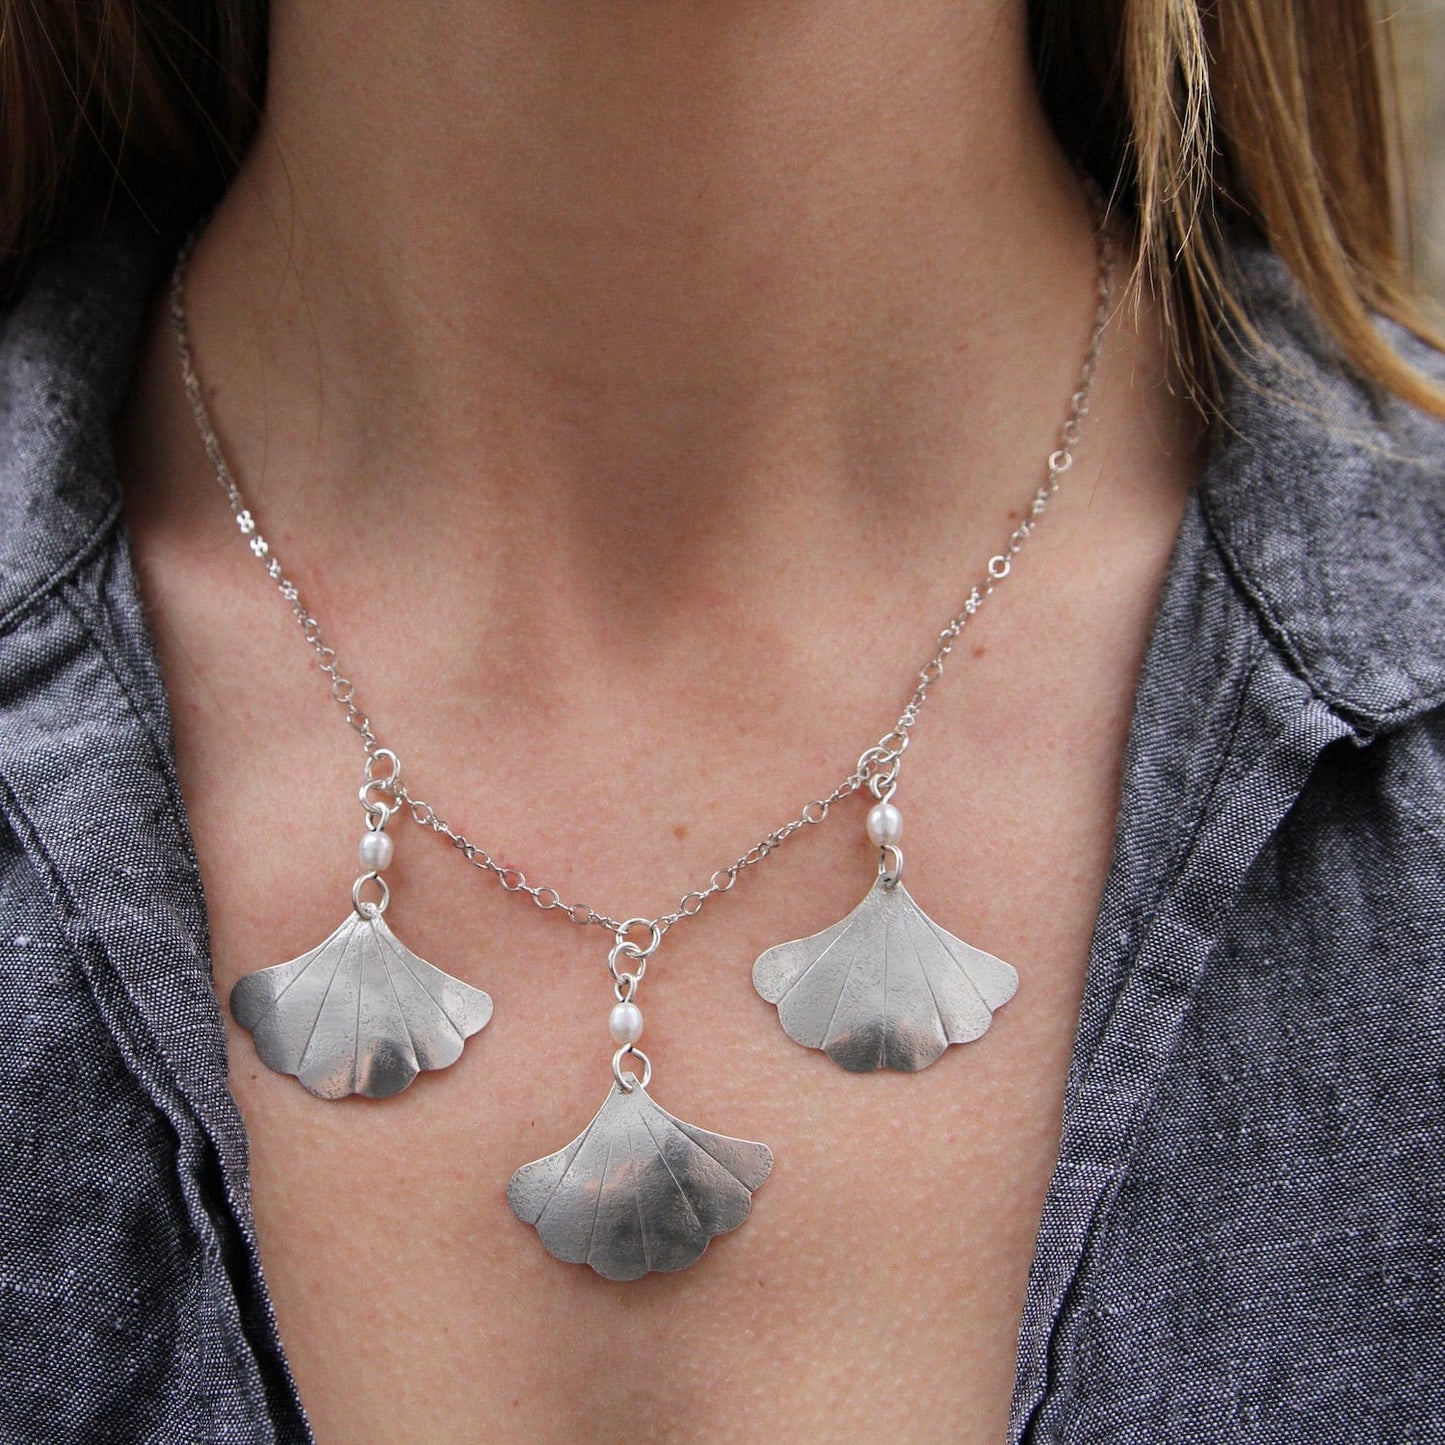 GINKGO NECKLACE | Amos Pewter, Handcrafted in Nova Scotia